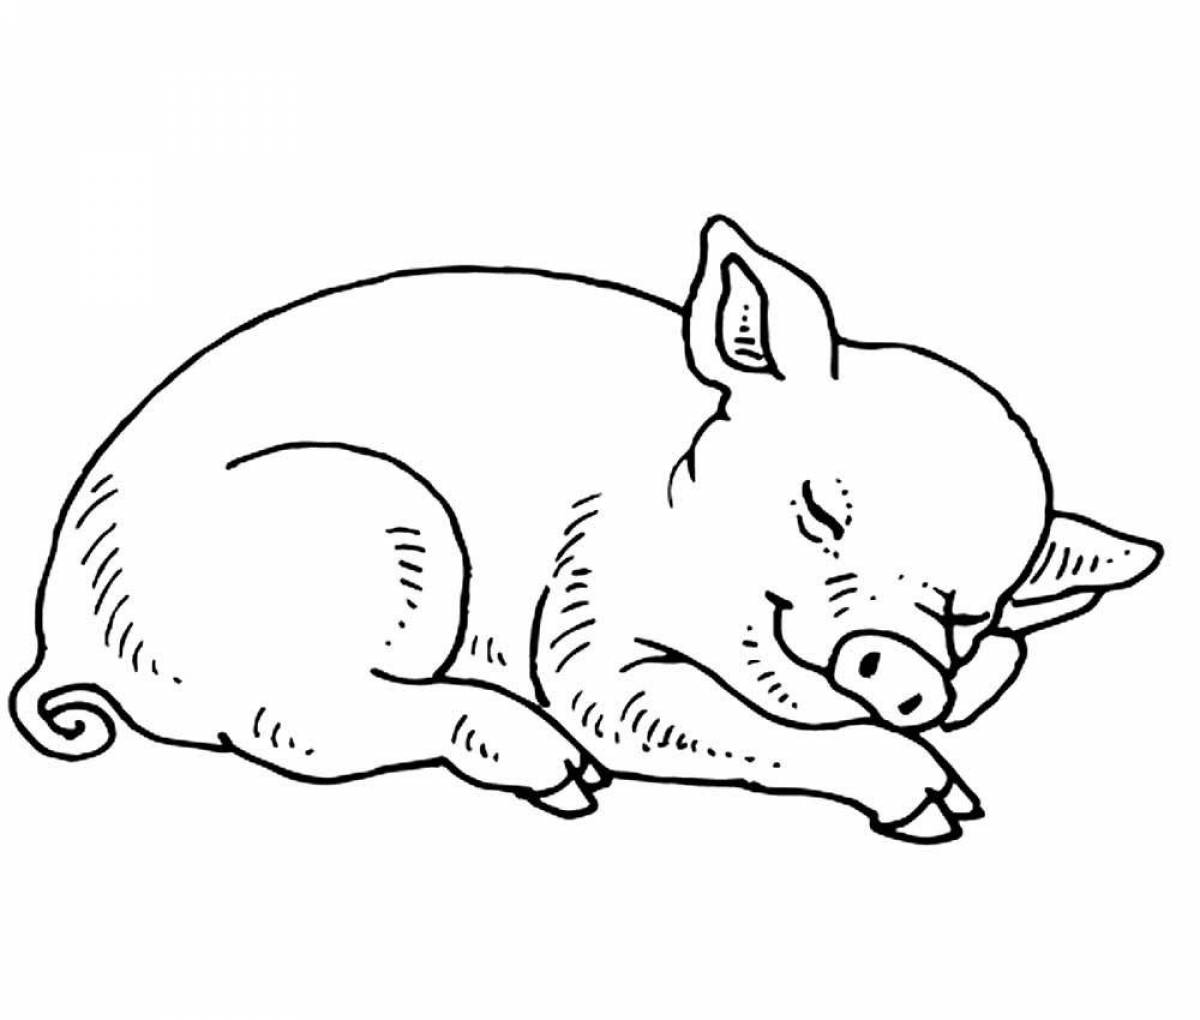 Coloring piglets during the game